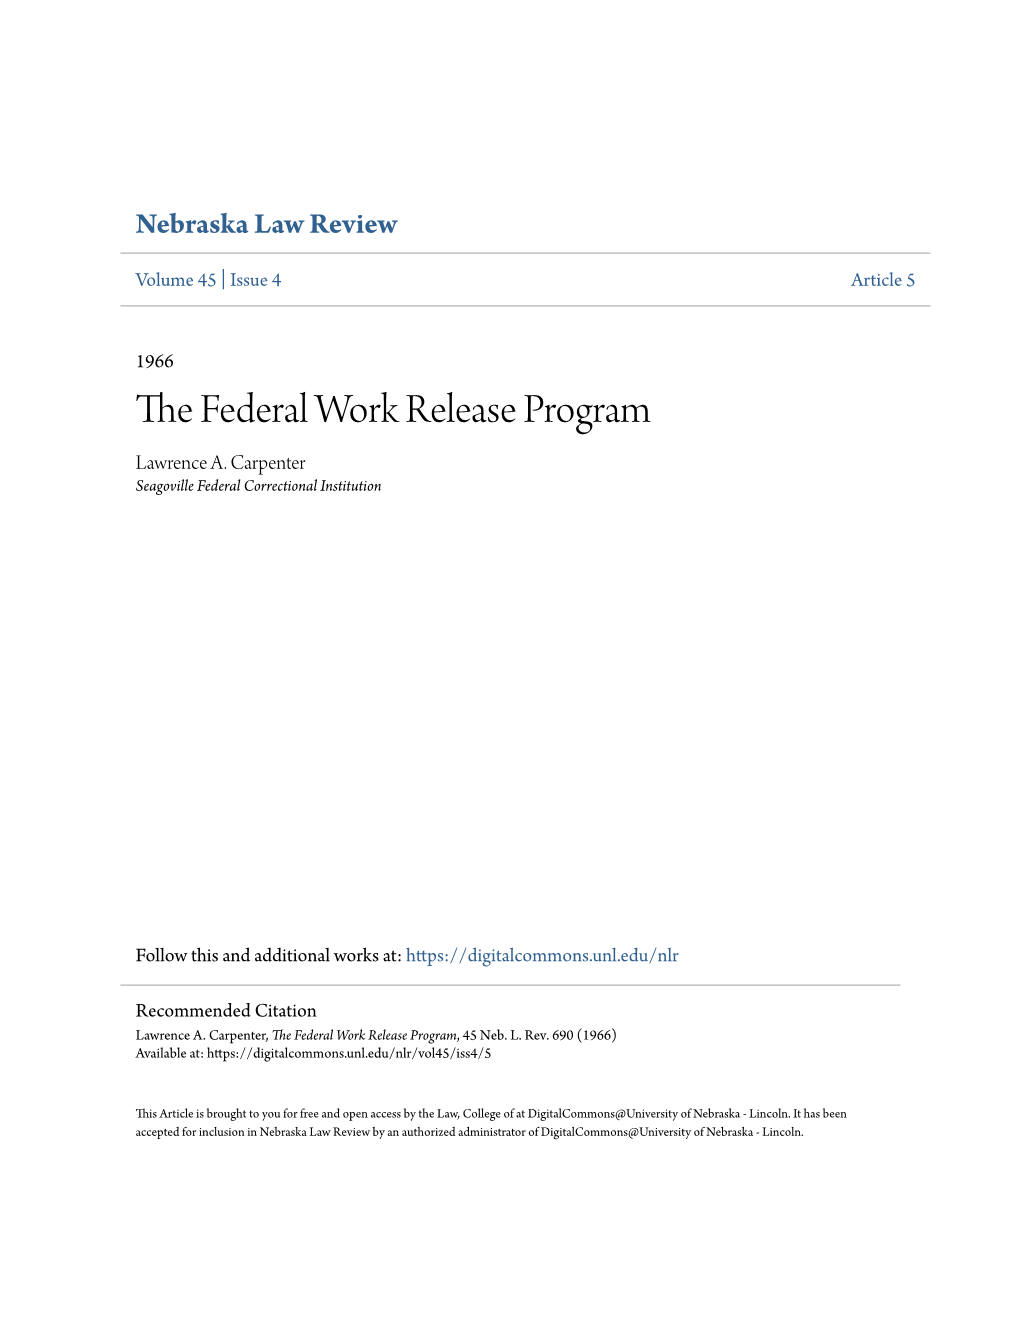 The Federal Work Release Program, 45 Neb